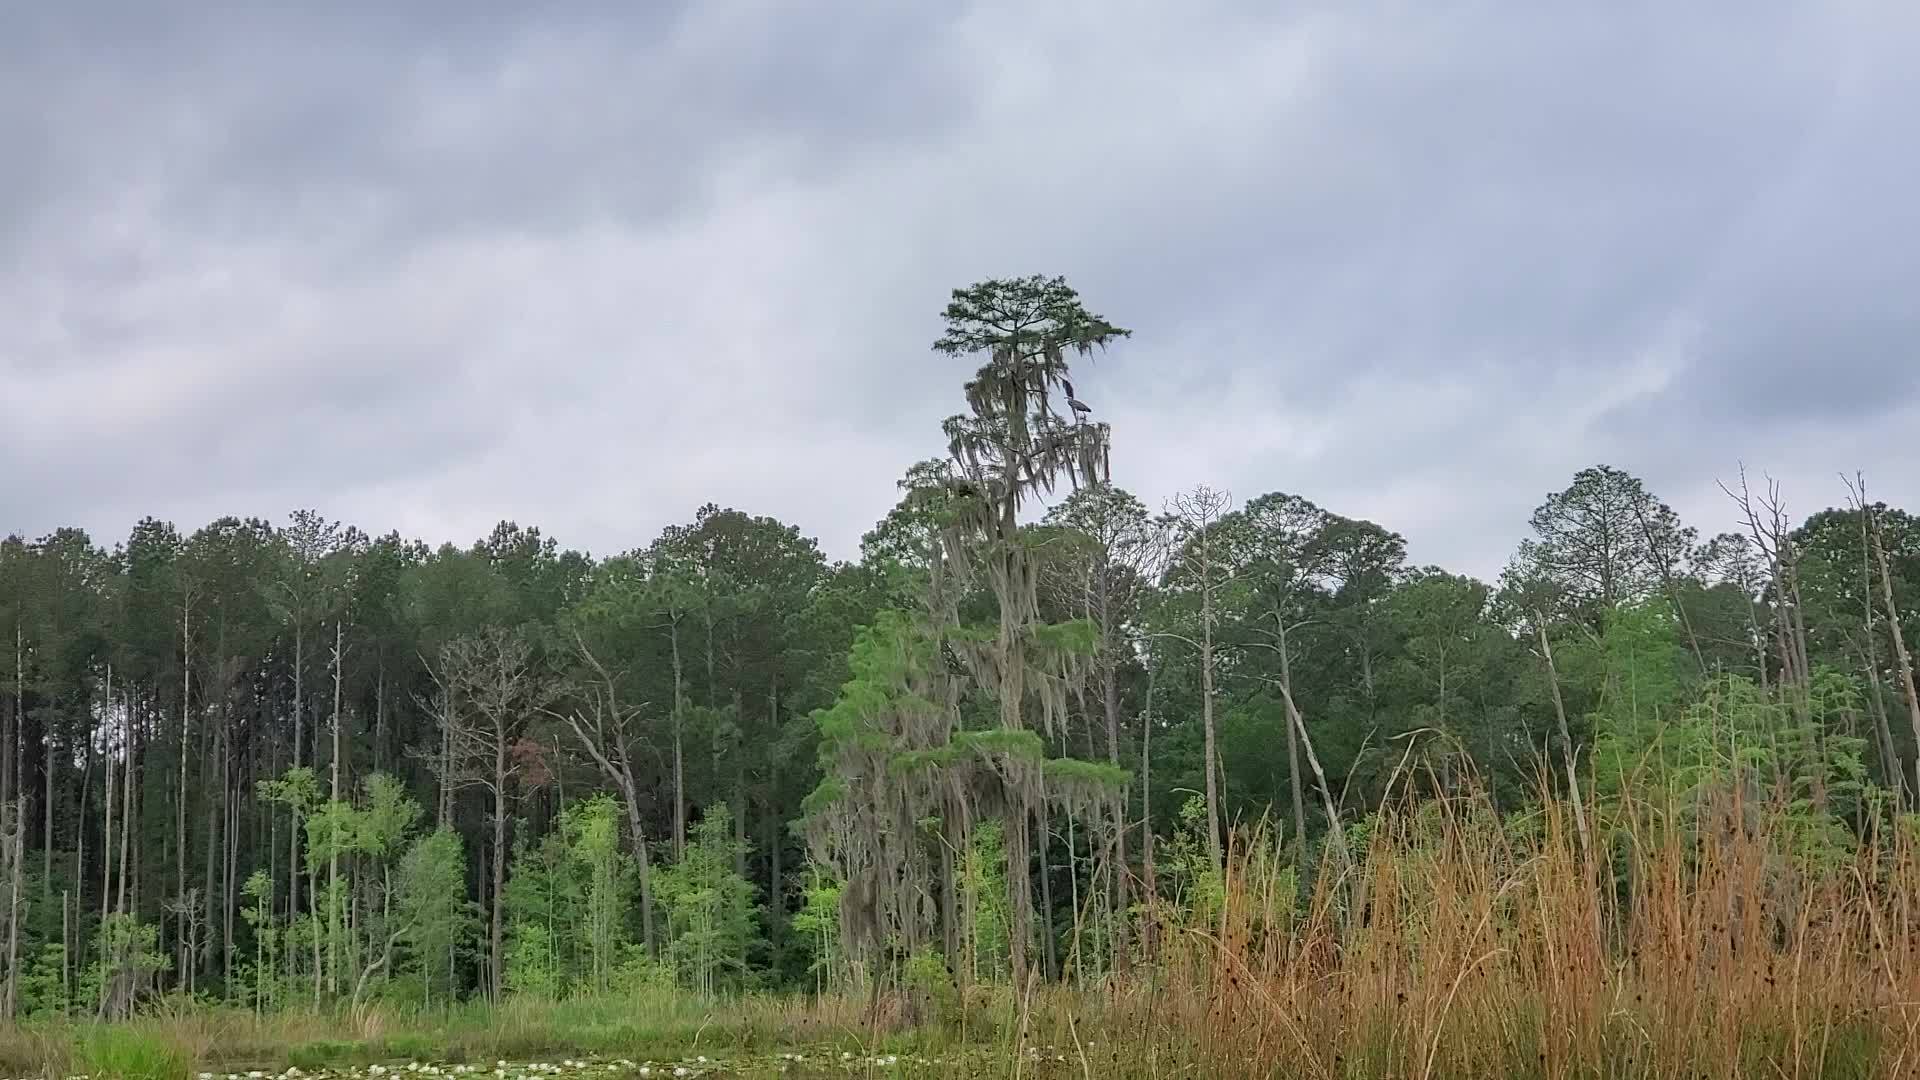 Movie: Second parent with little Great Blue Heron (39M)